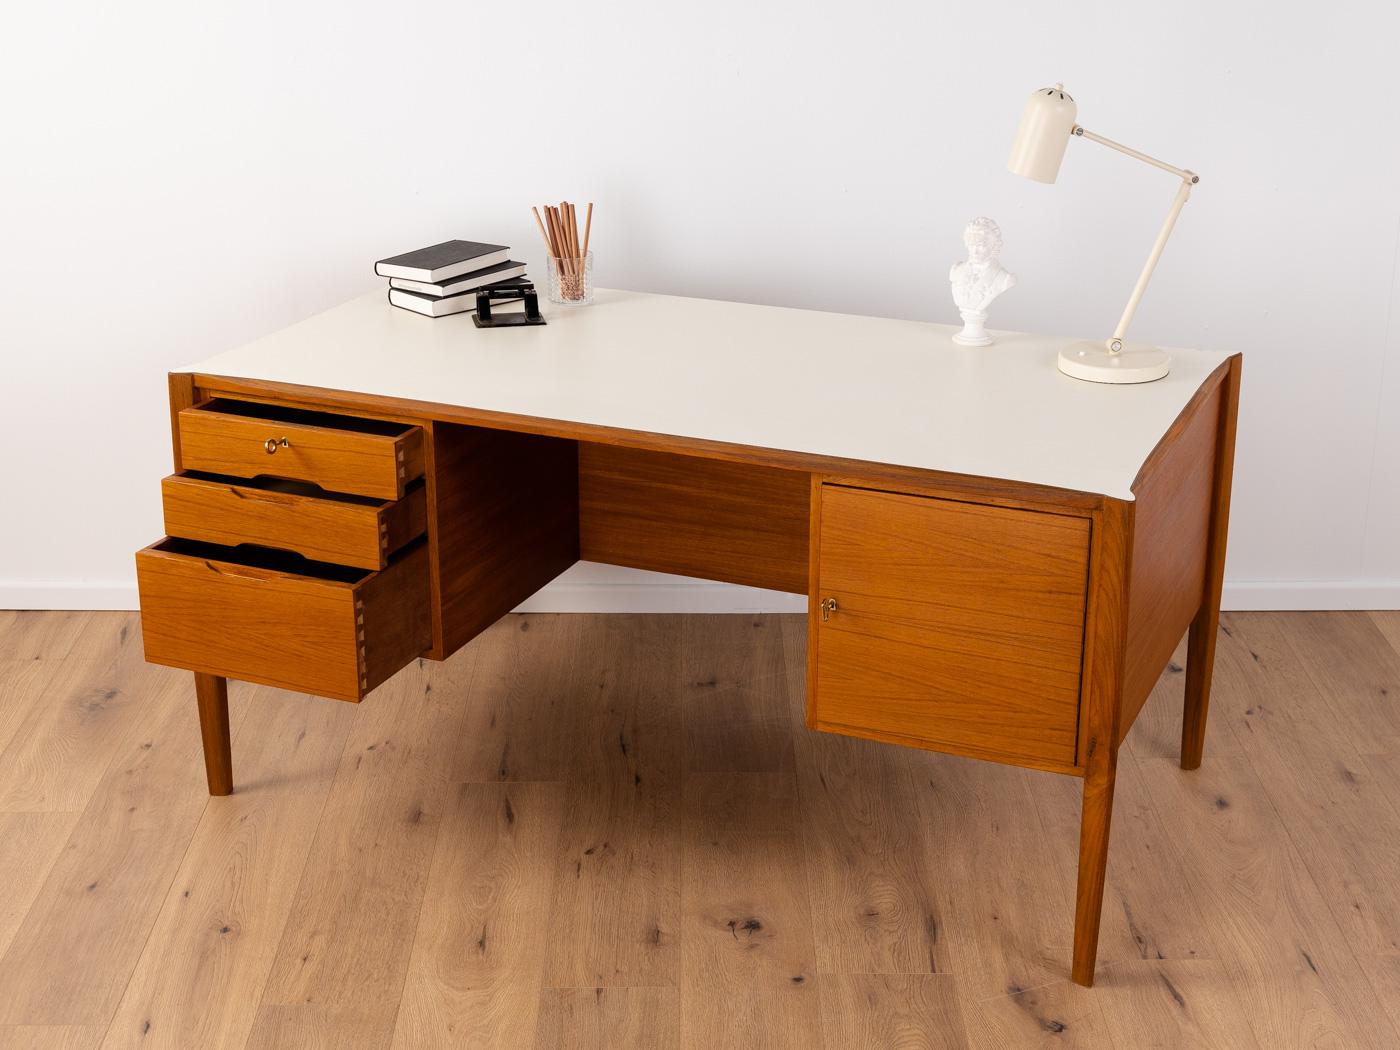 Wonderful freestanding desk from the 1960s. High-quality corpus in teak veneer with three drawers, one door, a book compartment on the rear and tapered feet. The top is coated with creamy white Formica.
Table bottom edge 63 cm

Quality